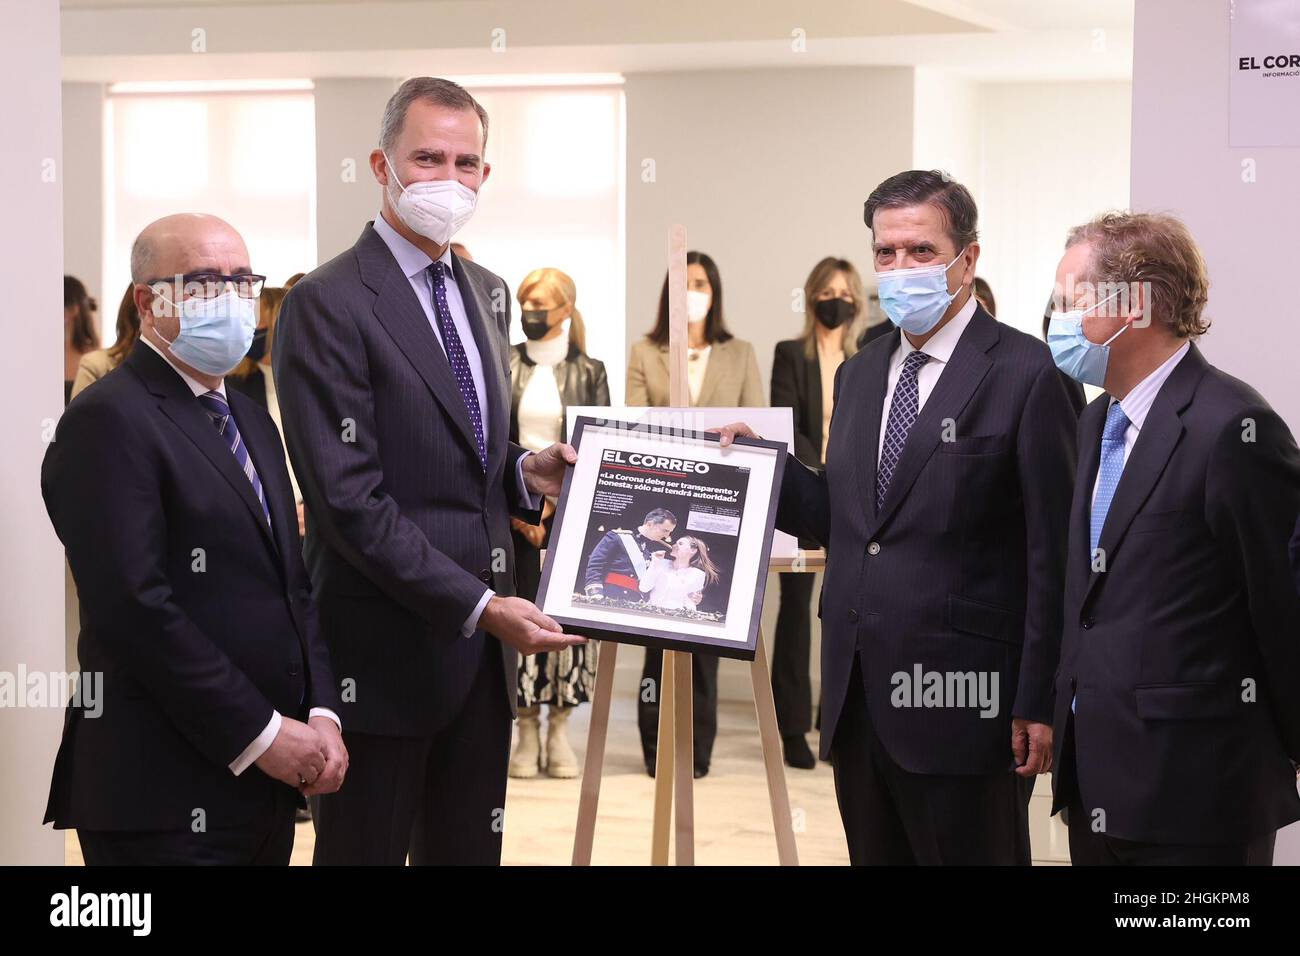 18-01-2022 King Felipe attend the opening of the new headquarters of the newspaper "El Correo" in Bilbao.  (Photo by Thorton/PPE/Sipa USA) Stock Photo